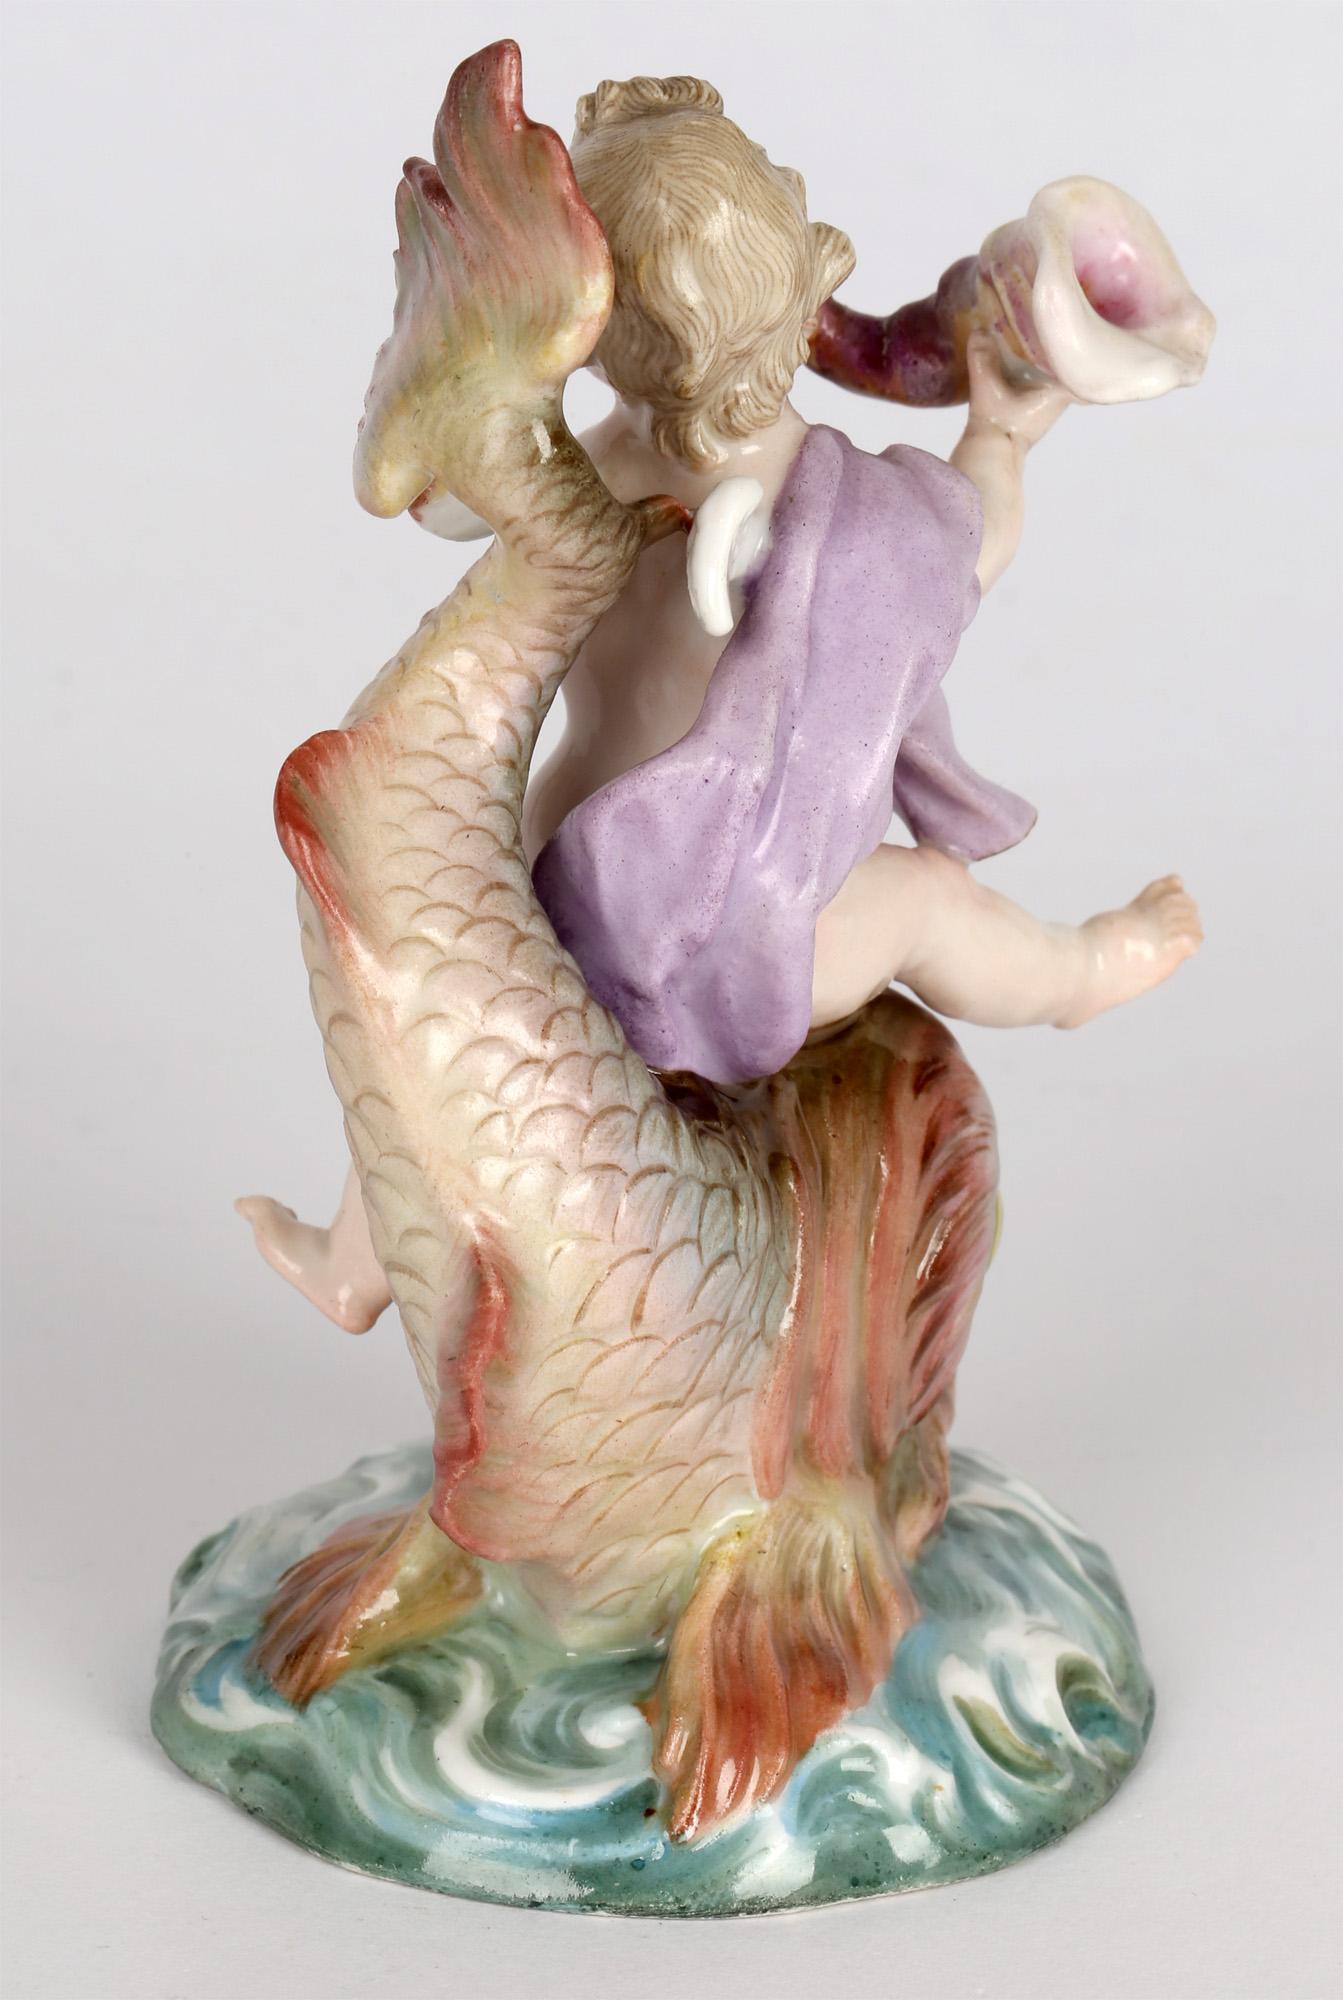 Hand-Painted Meissen Porcelain Figure of a Cherub Playing a Horn Riding on a Large Fish